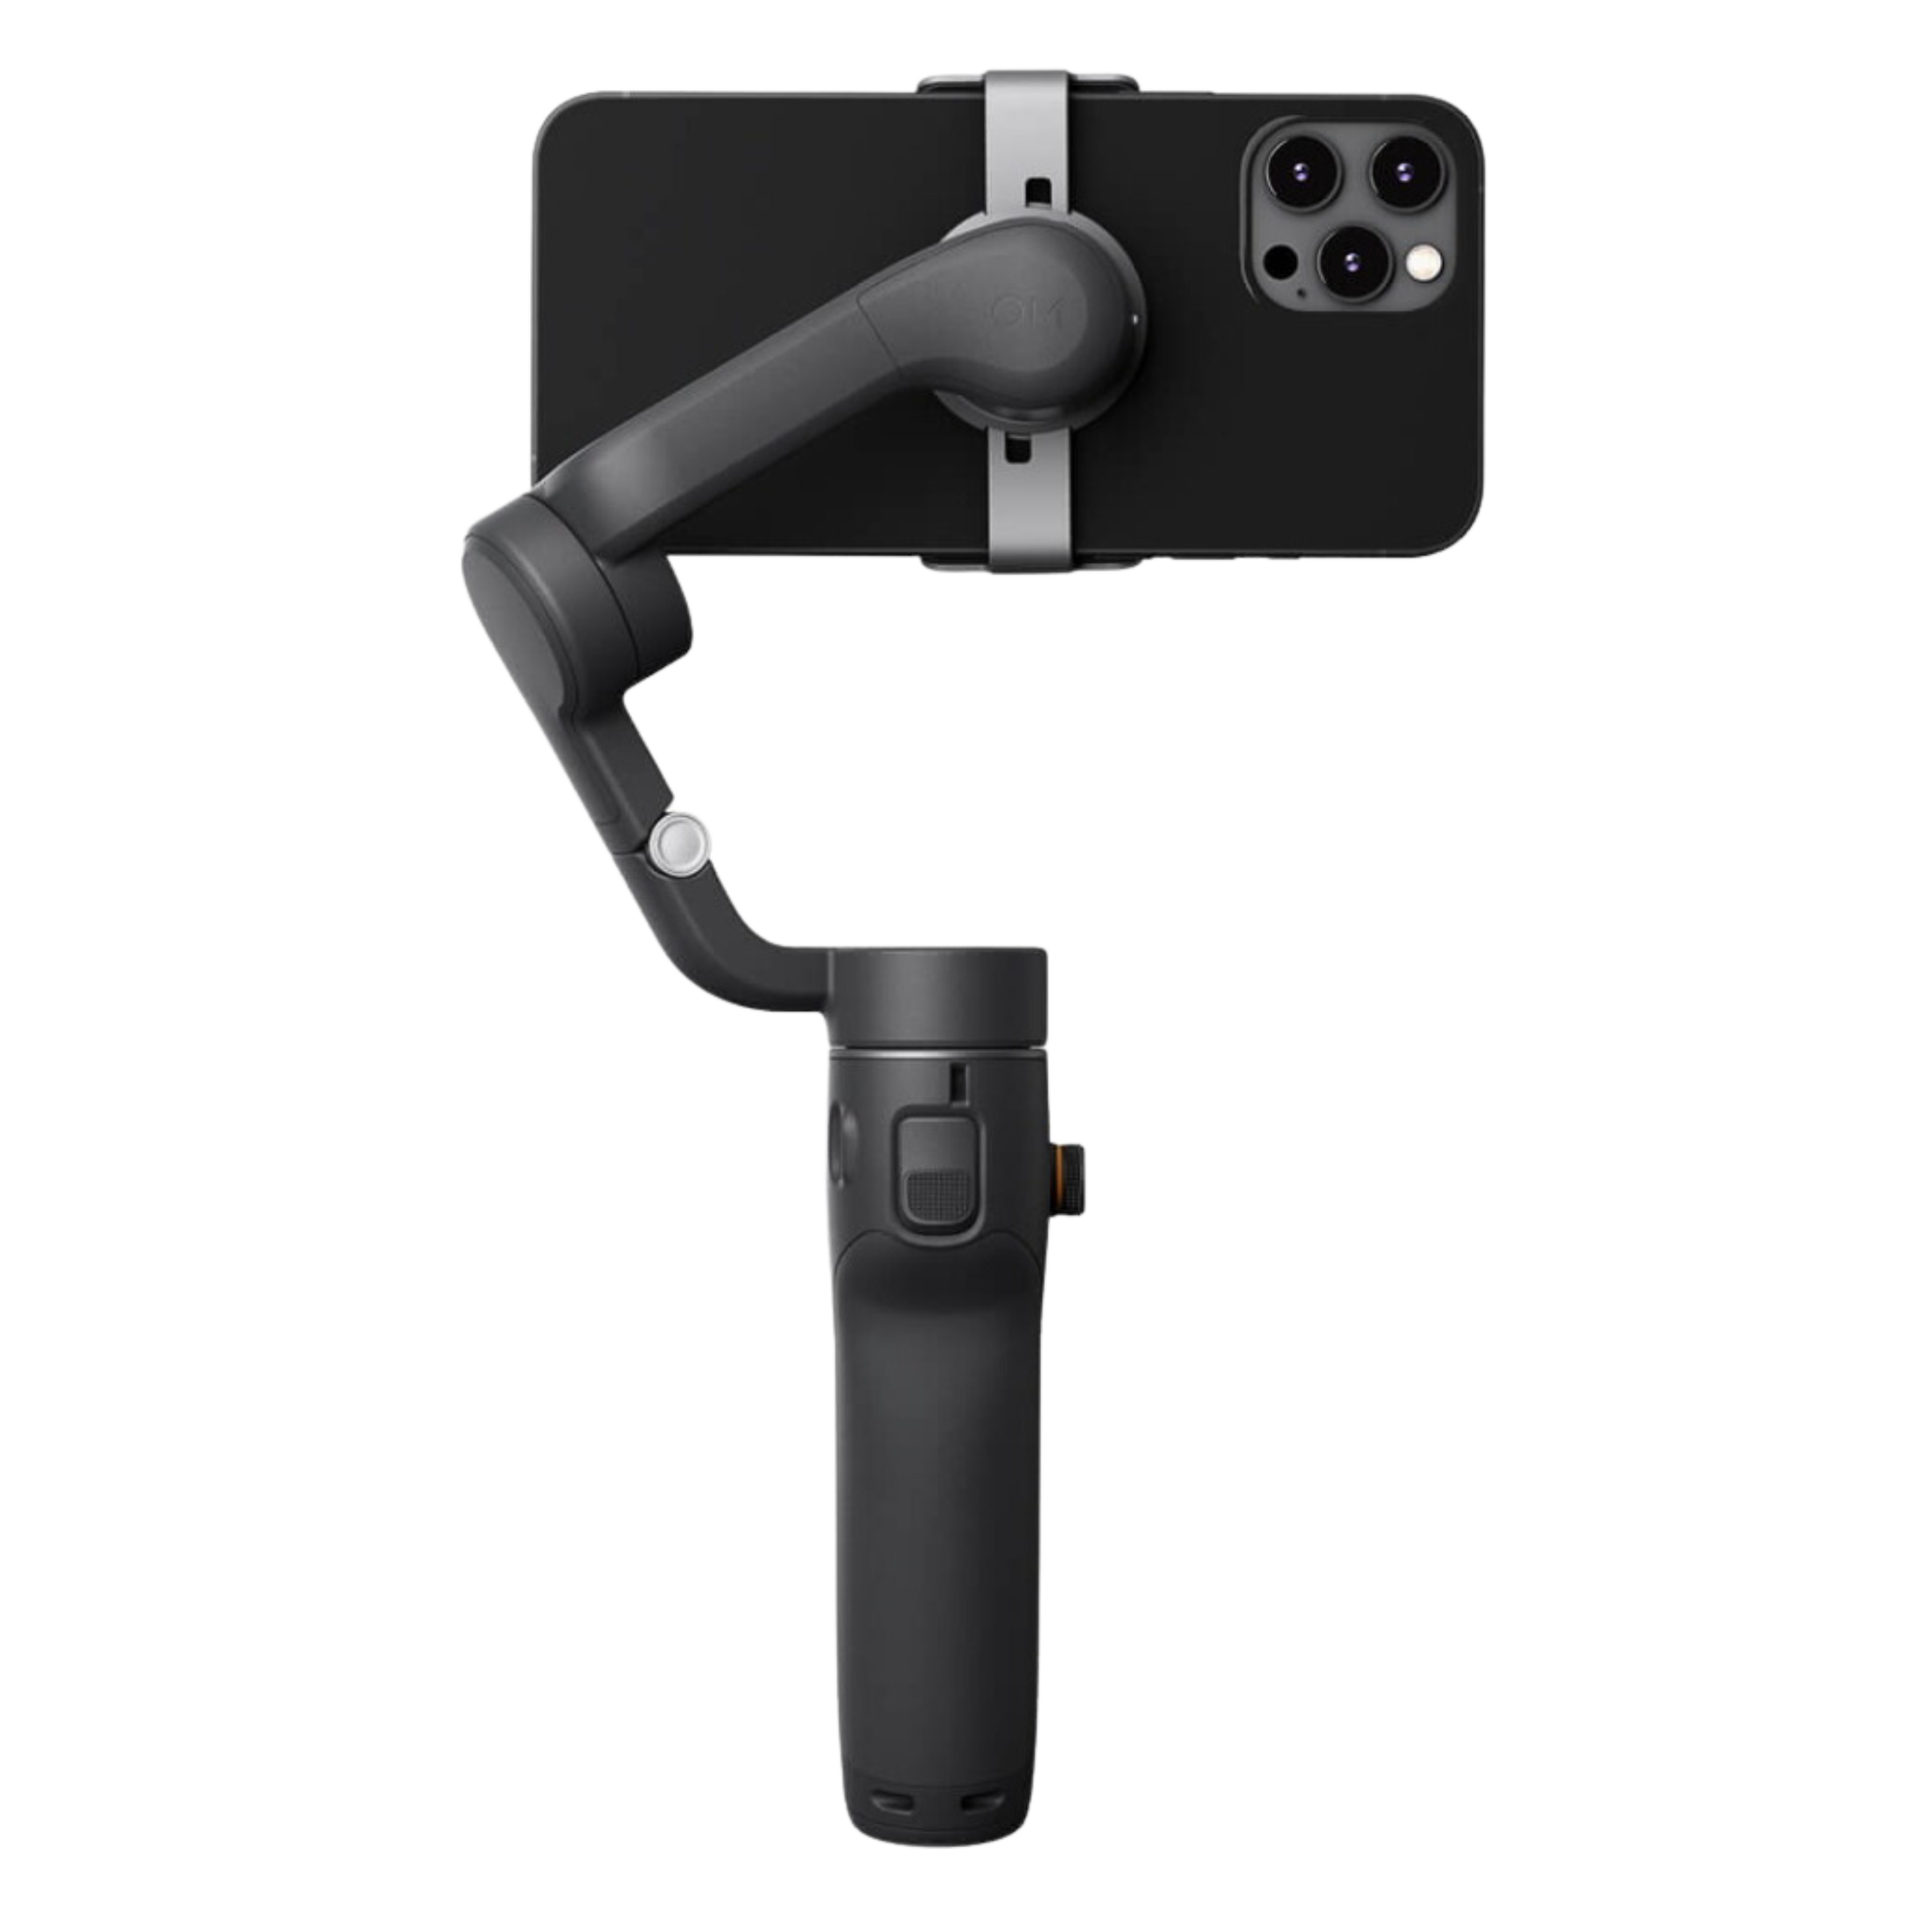 This is an image of DJI OSMO Mobile 6 on rent offerred by SharePal.in